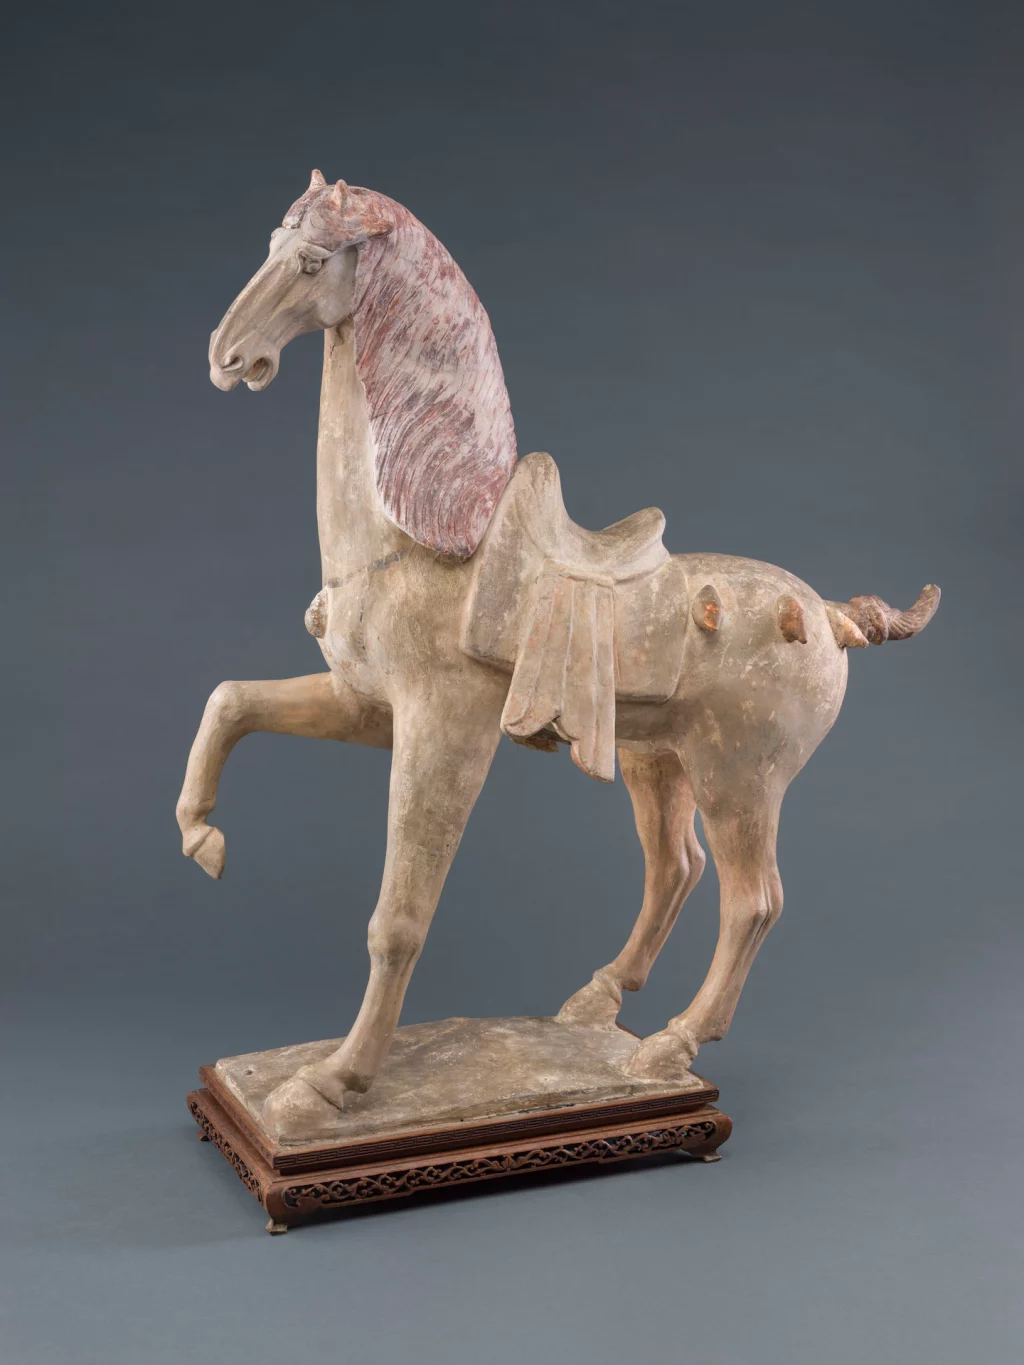 Art meets science in the analysis of an ancient dancing horse statue